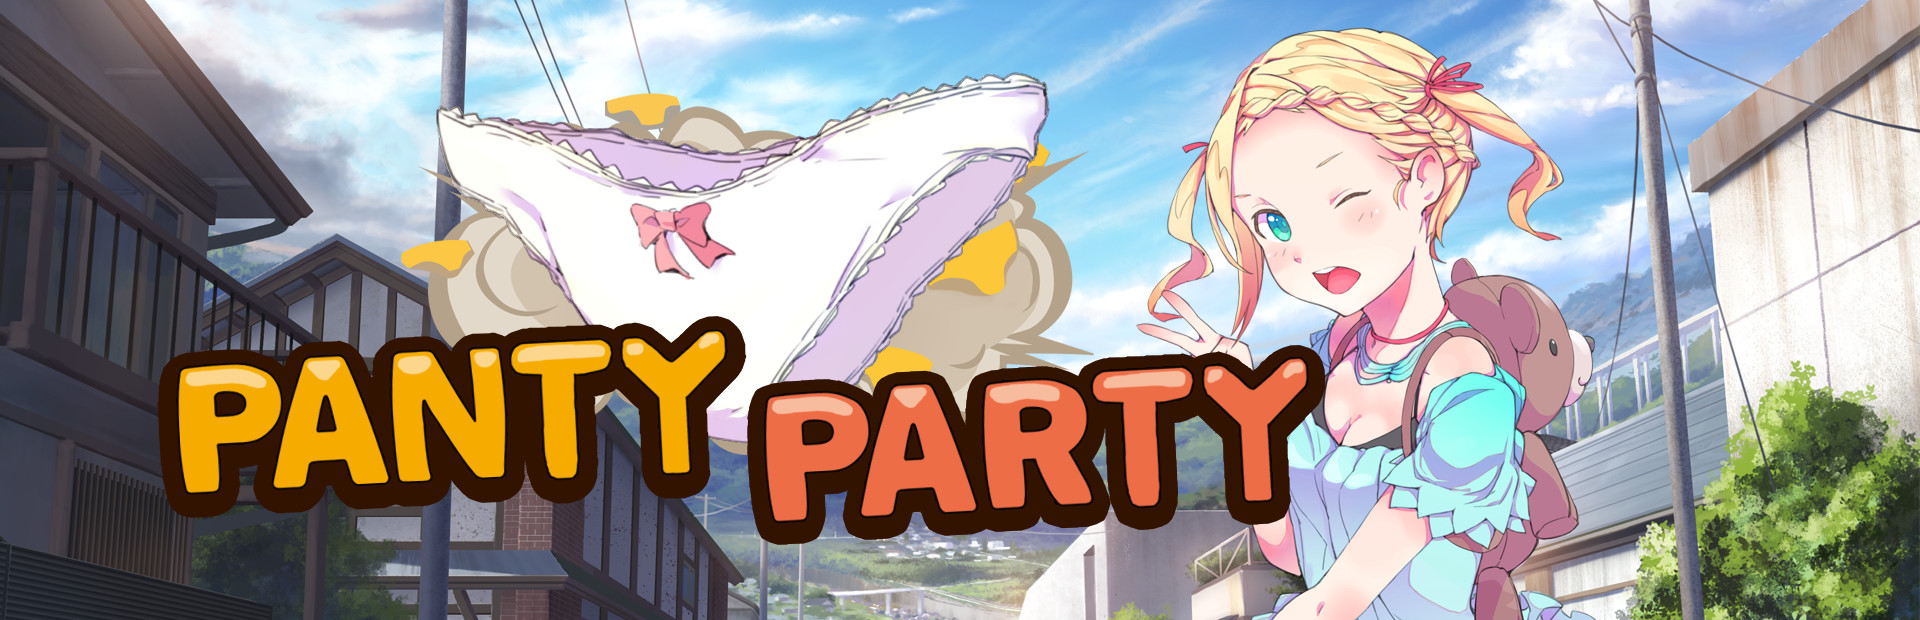 Panty Party cover image